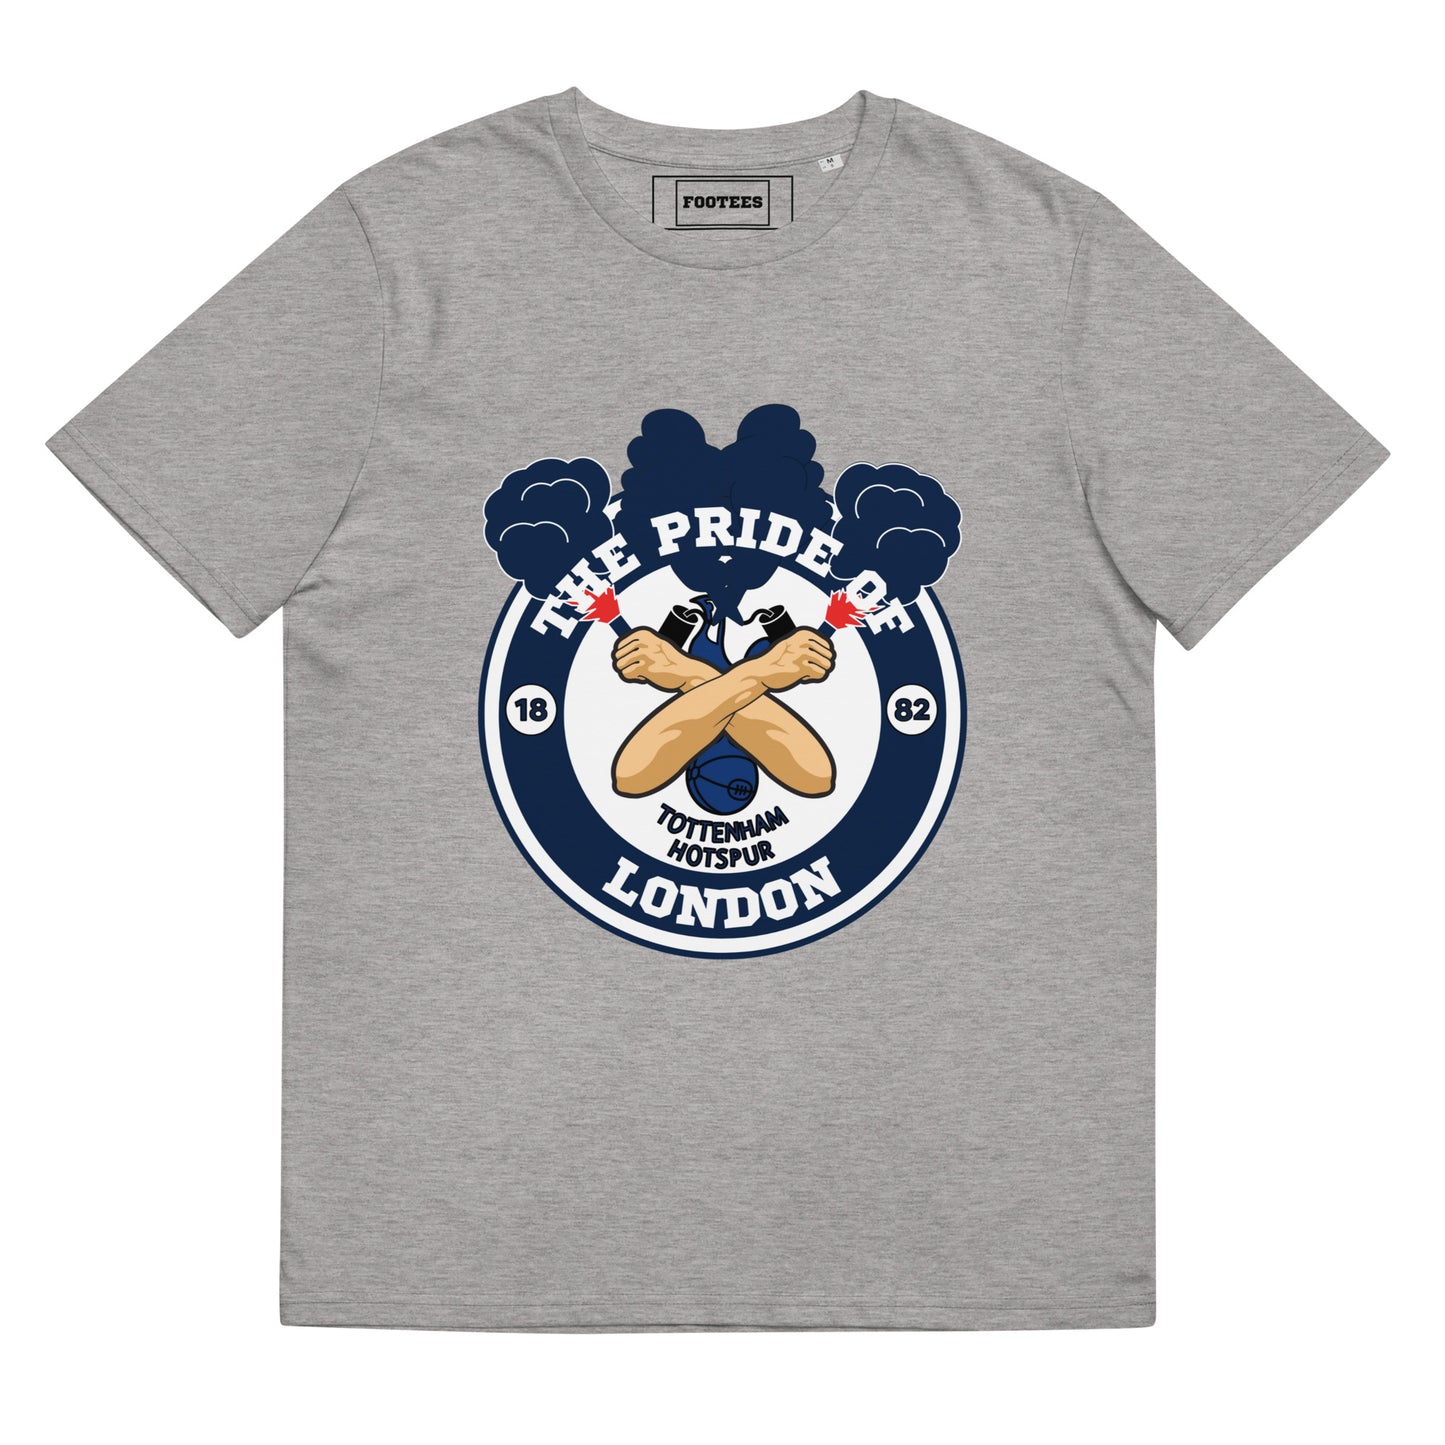 The Pride of London THFC Tee